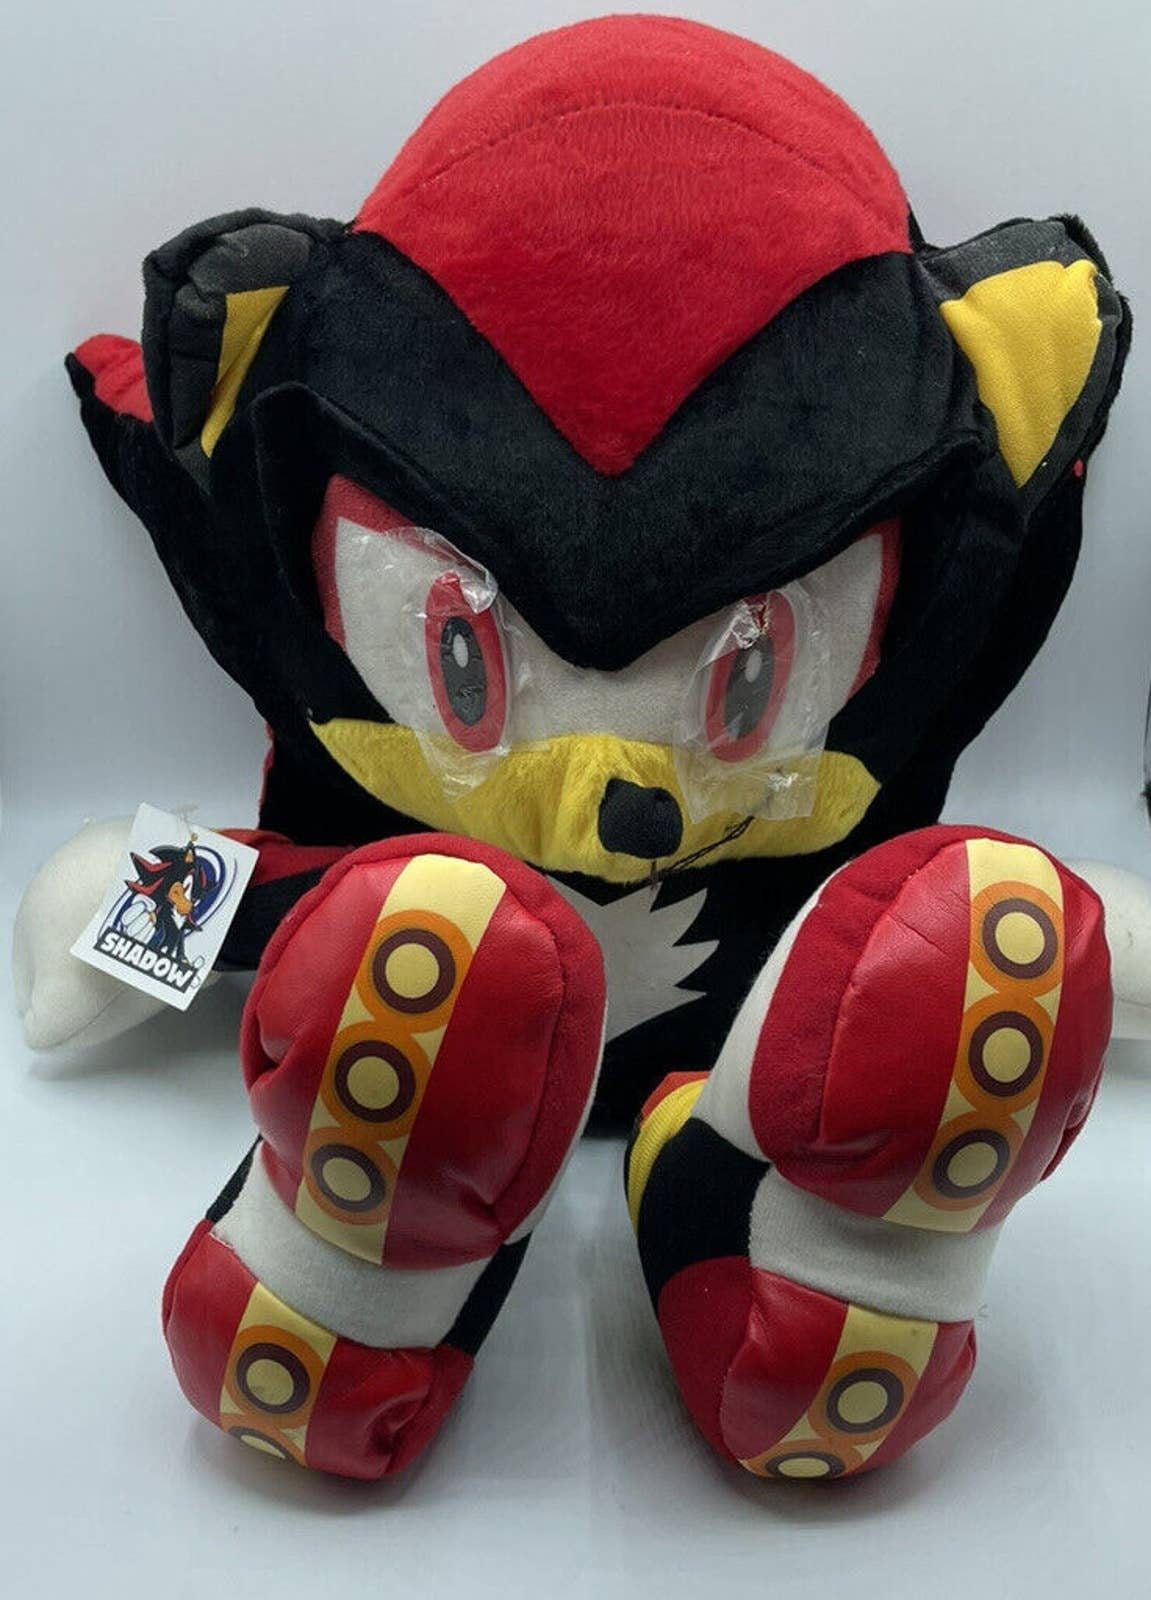 Custom plush just like Sonic Adventure 2 with Soap Shoes -  Portugal